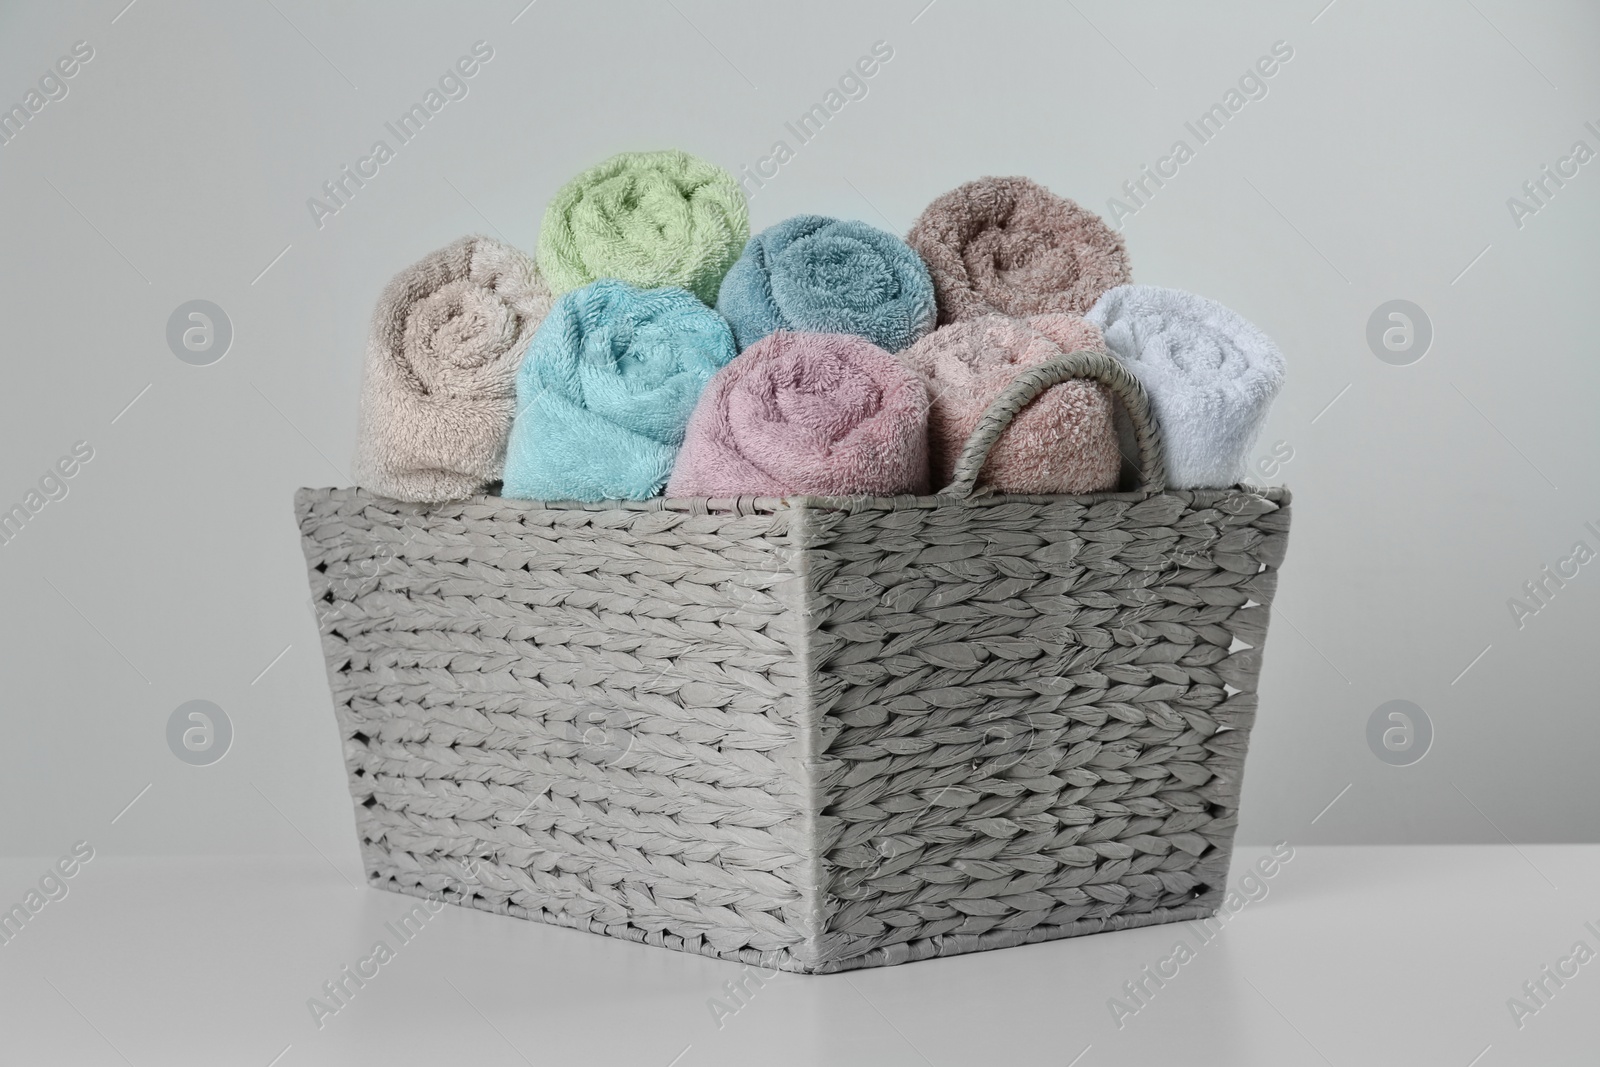 Photo of Wicker basket with clean soft towels on light background